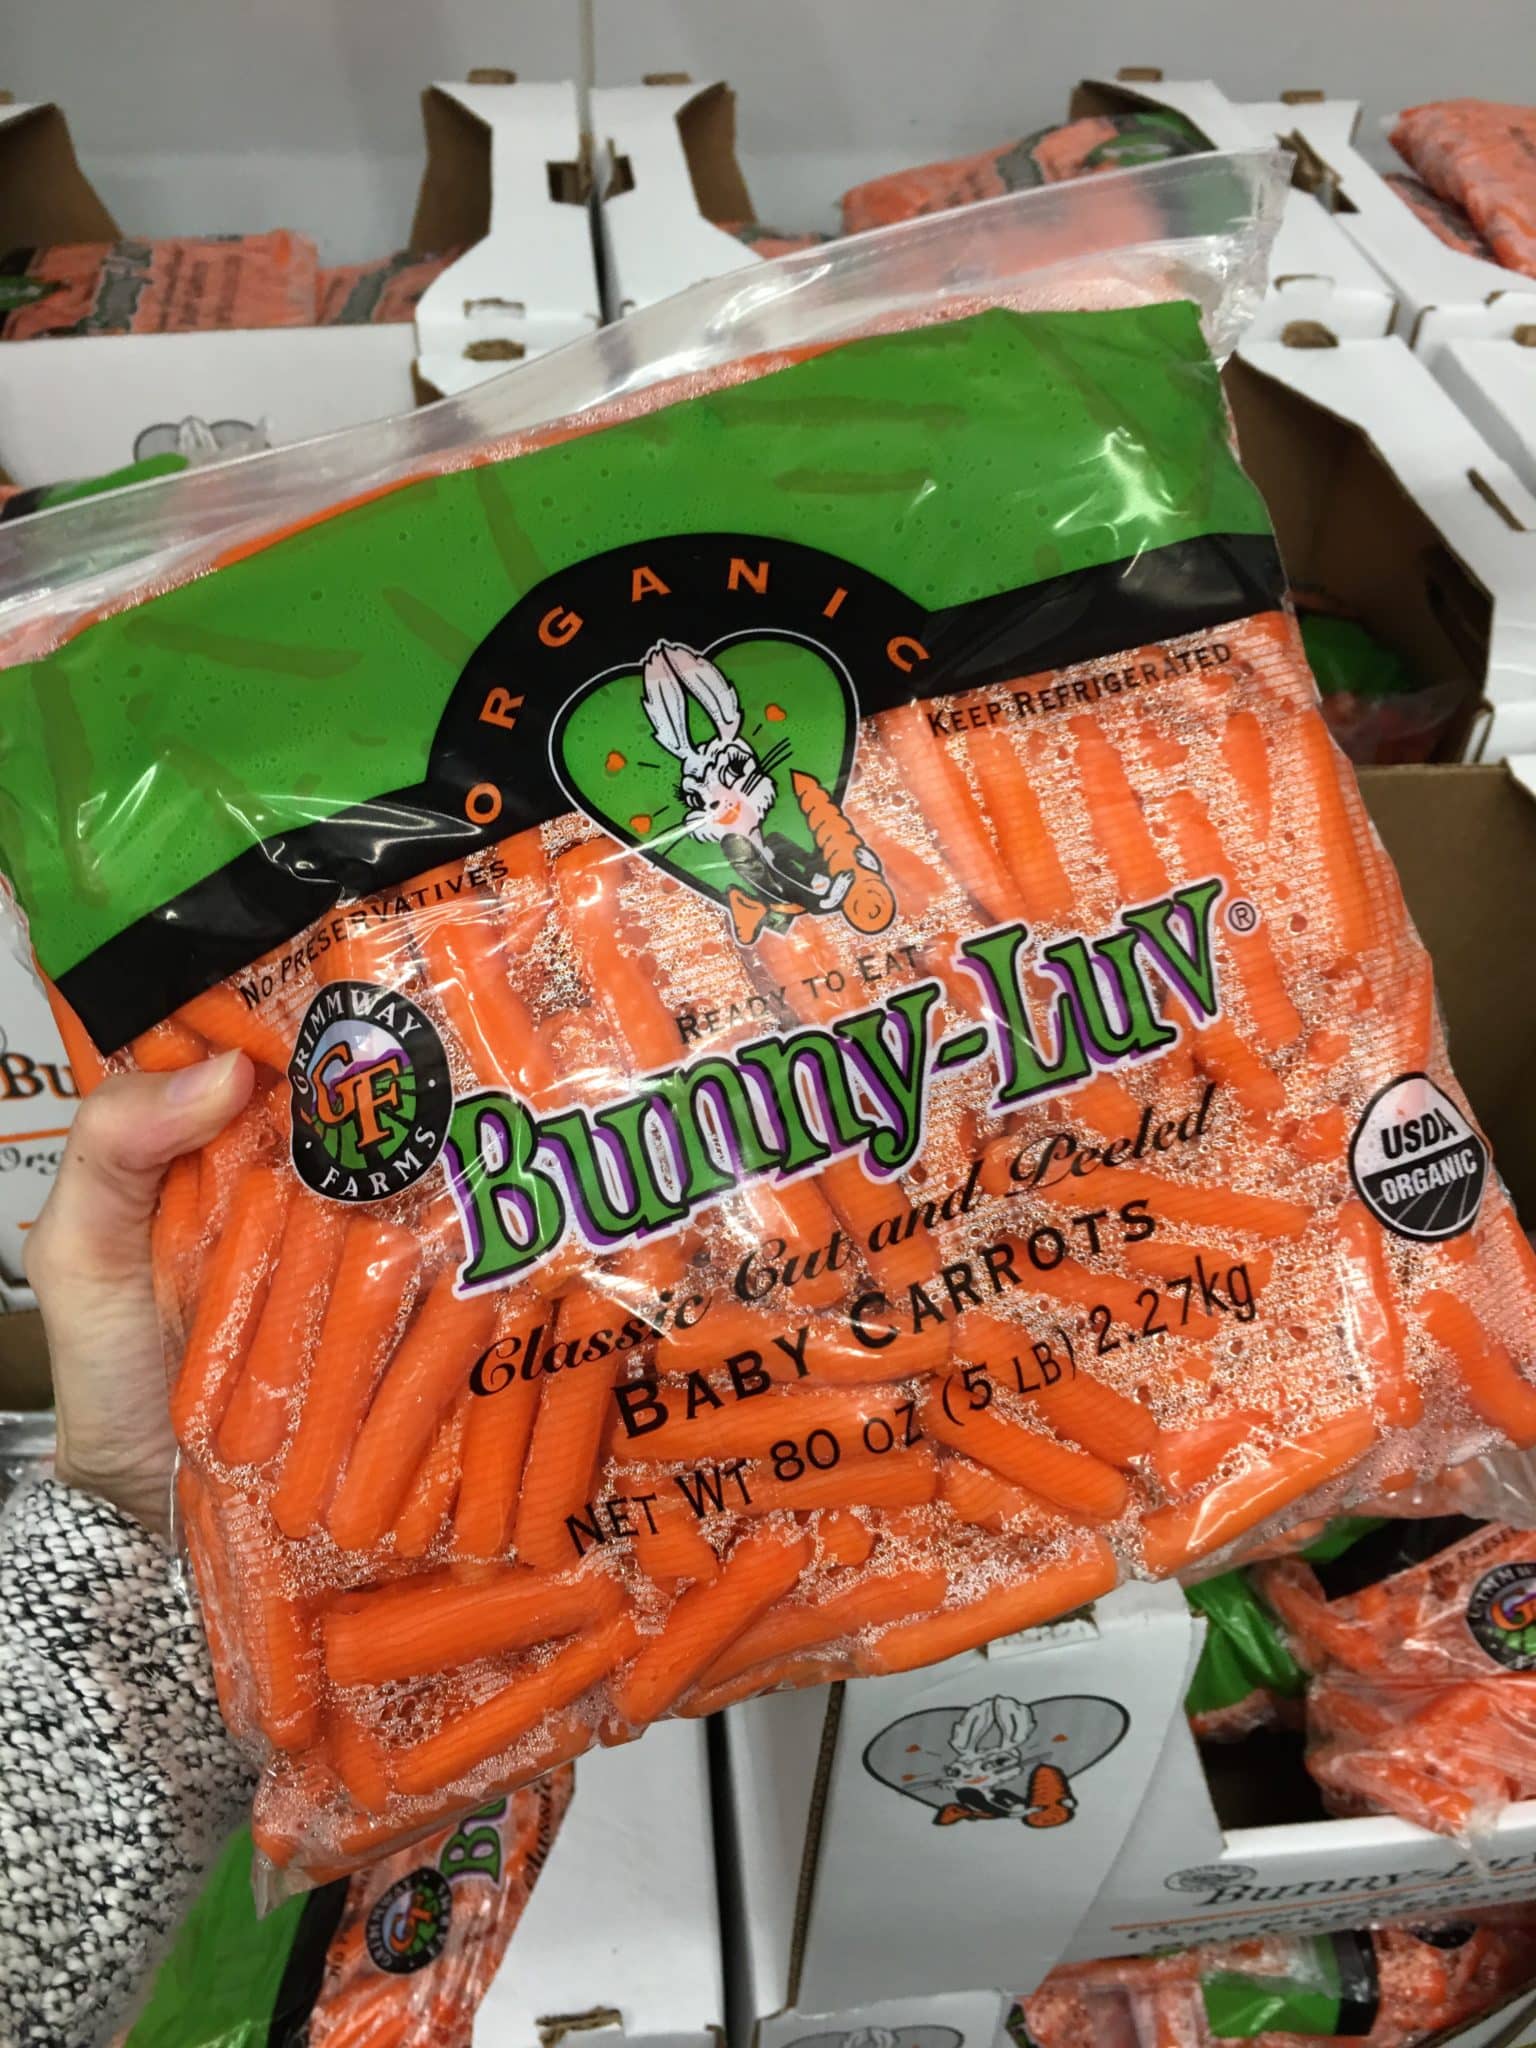 Organic baby carrots from Costco